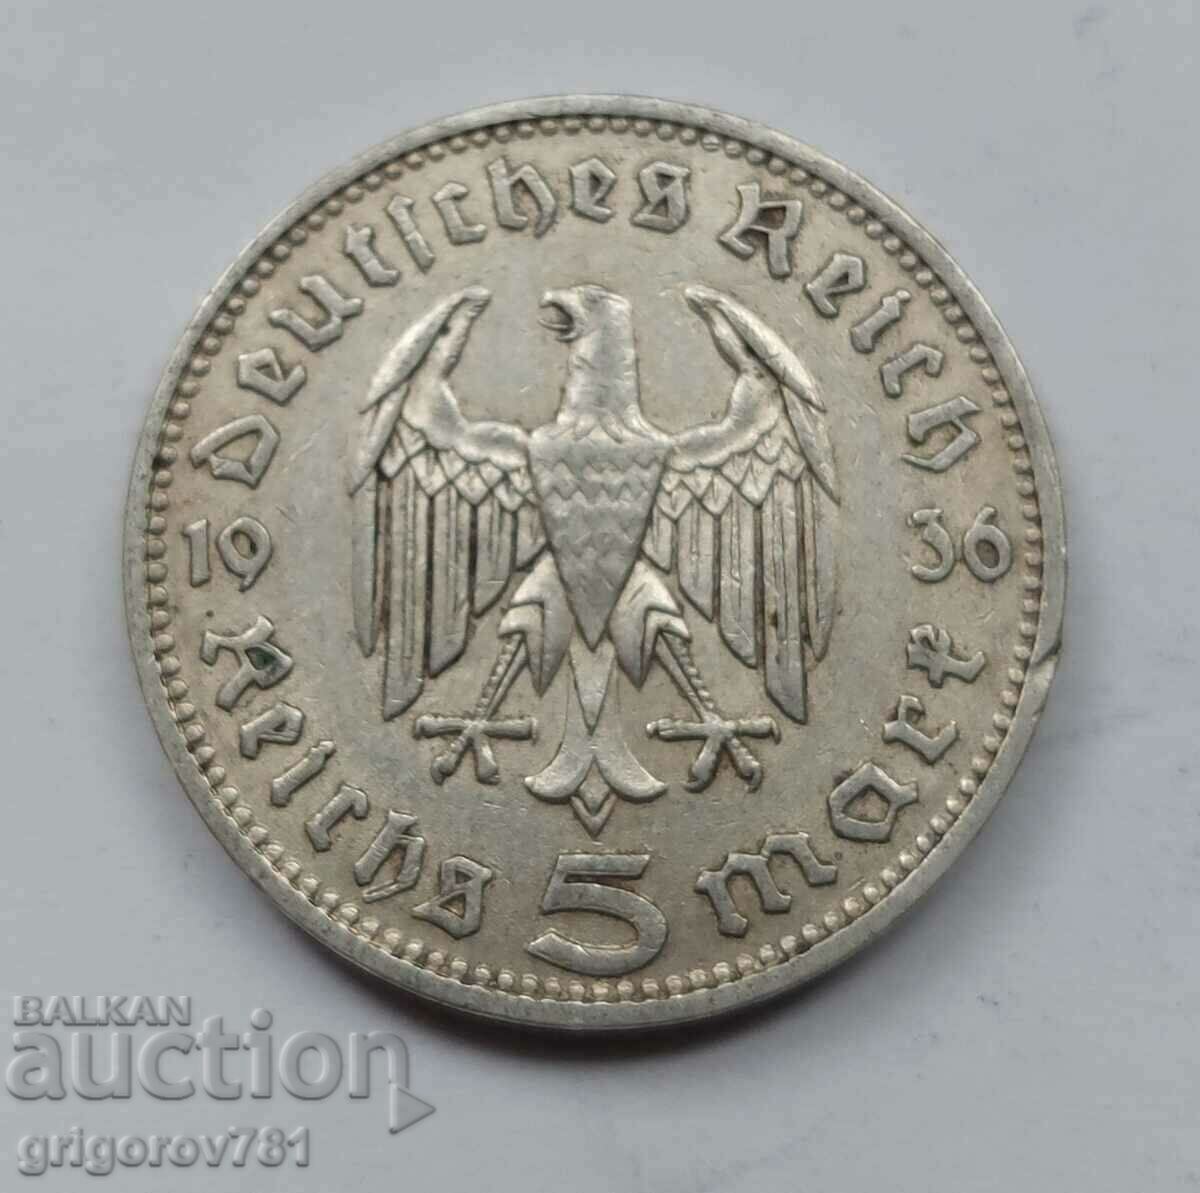 5 Mark Silver Germany 1936 D III Reich Silver Coin #20